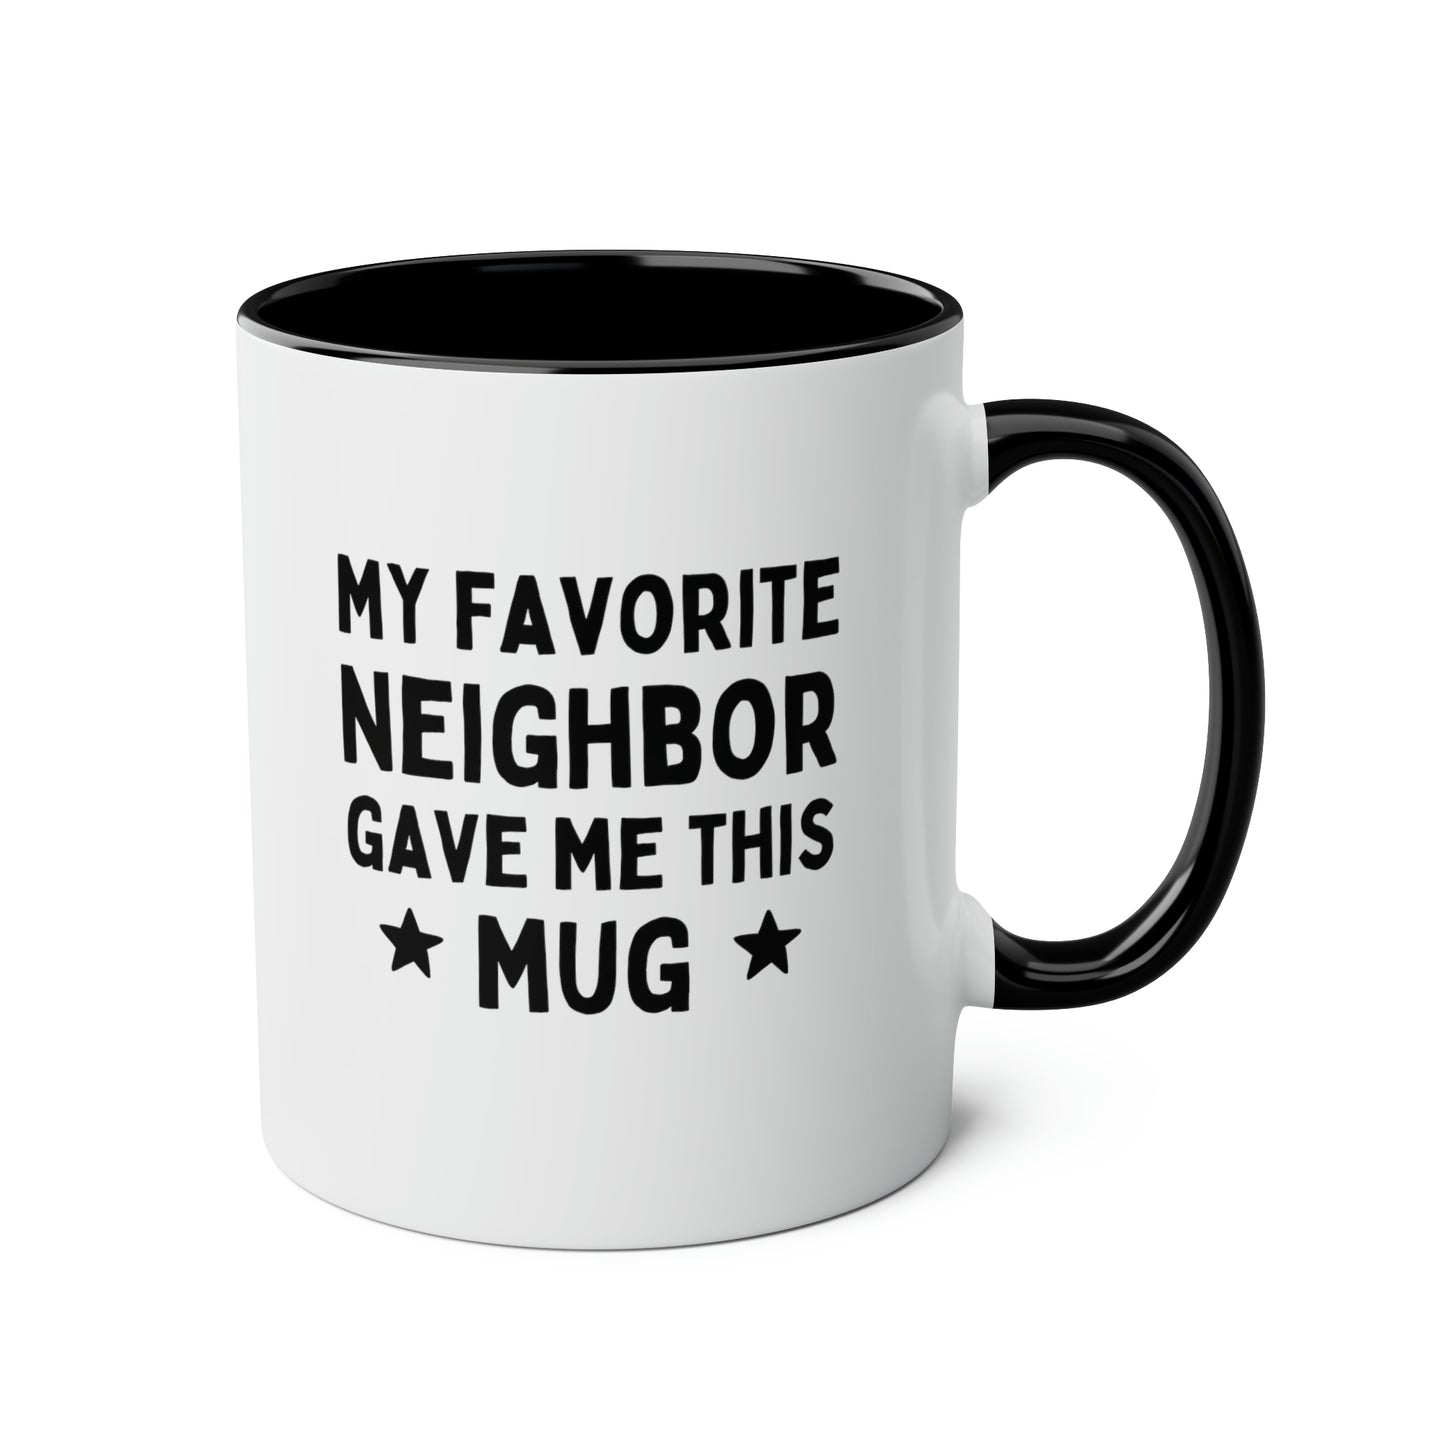 My Favorite Neighbor Gave Me This Mug 11oz white with black accent funny large coffee mug gift for moving best waveywares wavey wares wavywares wavy wares